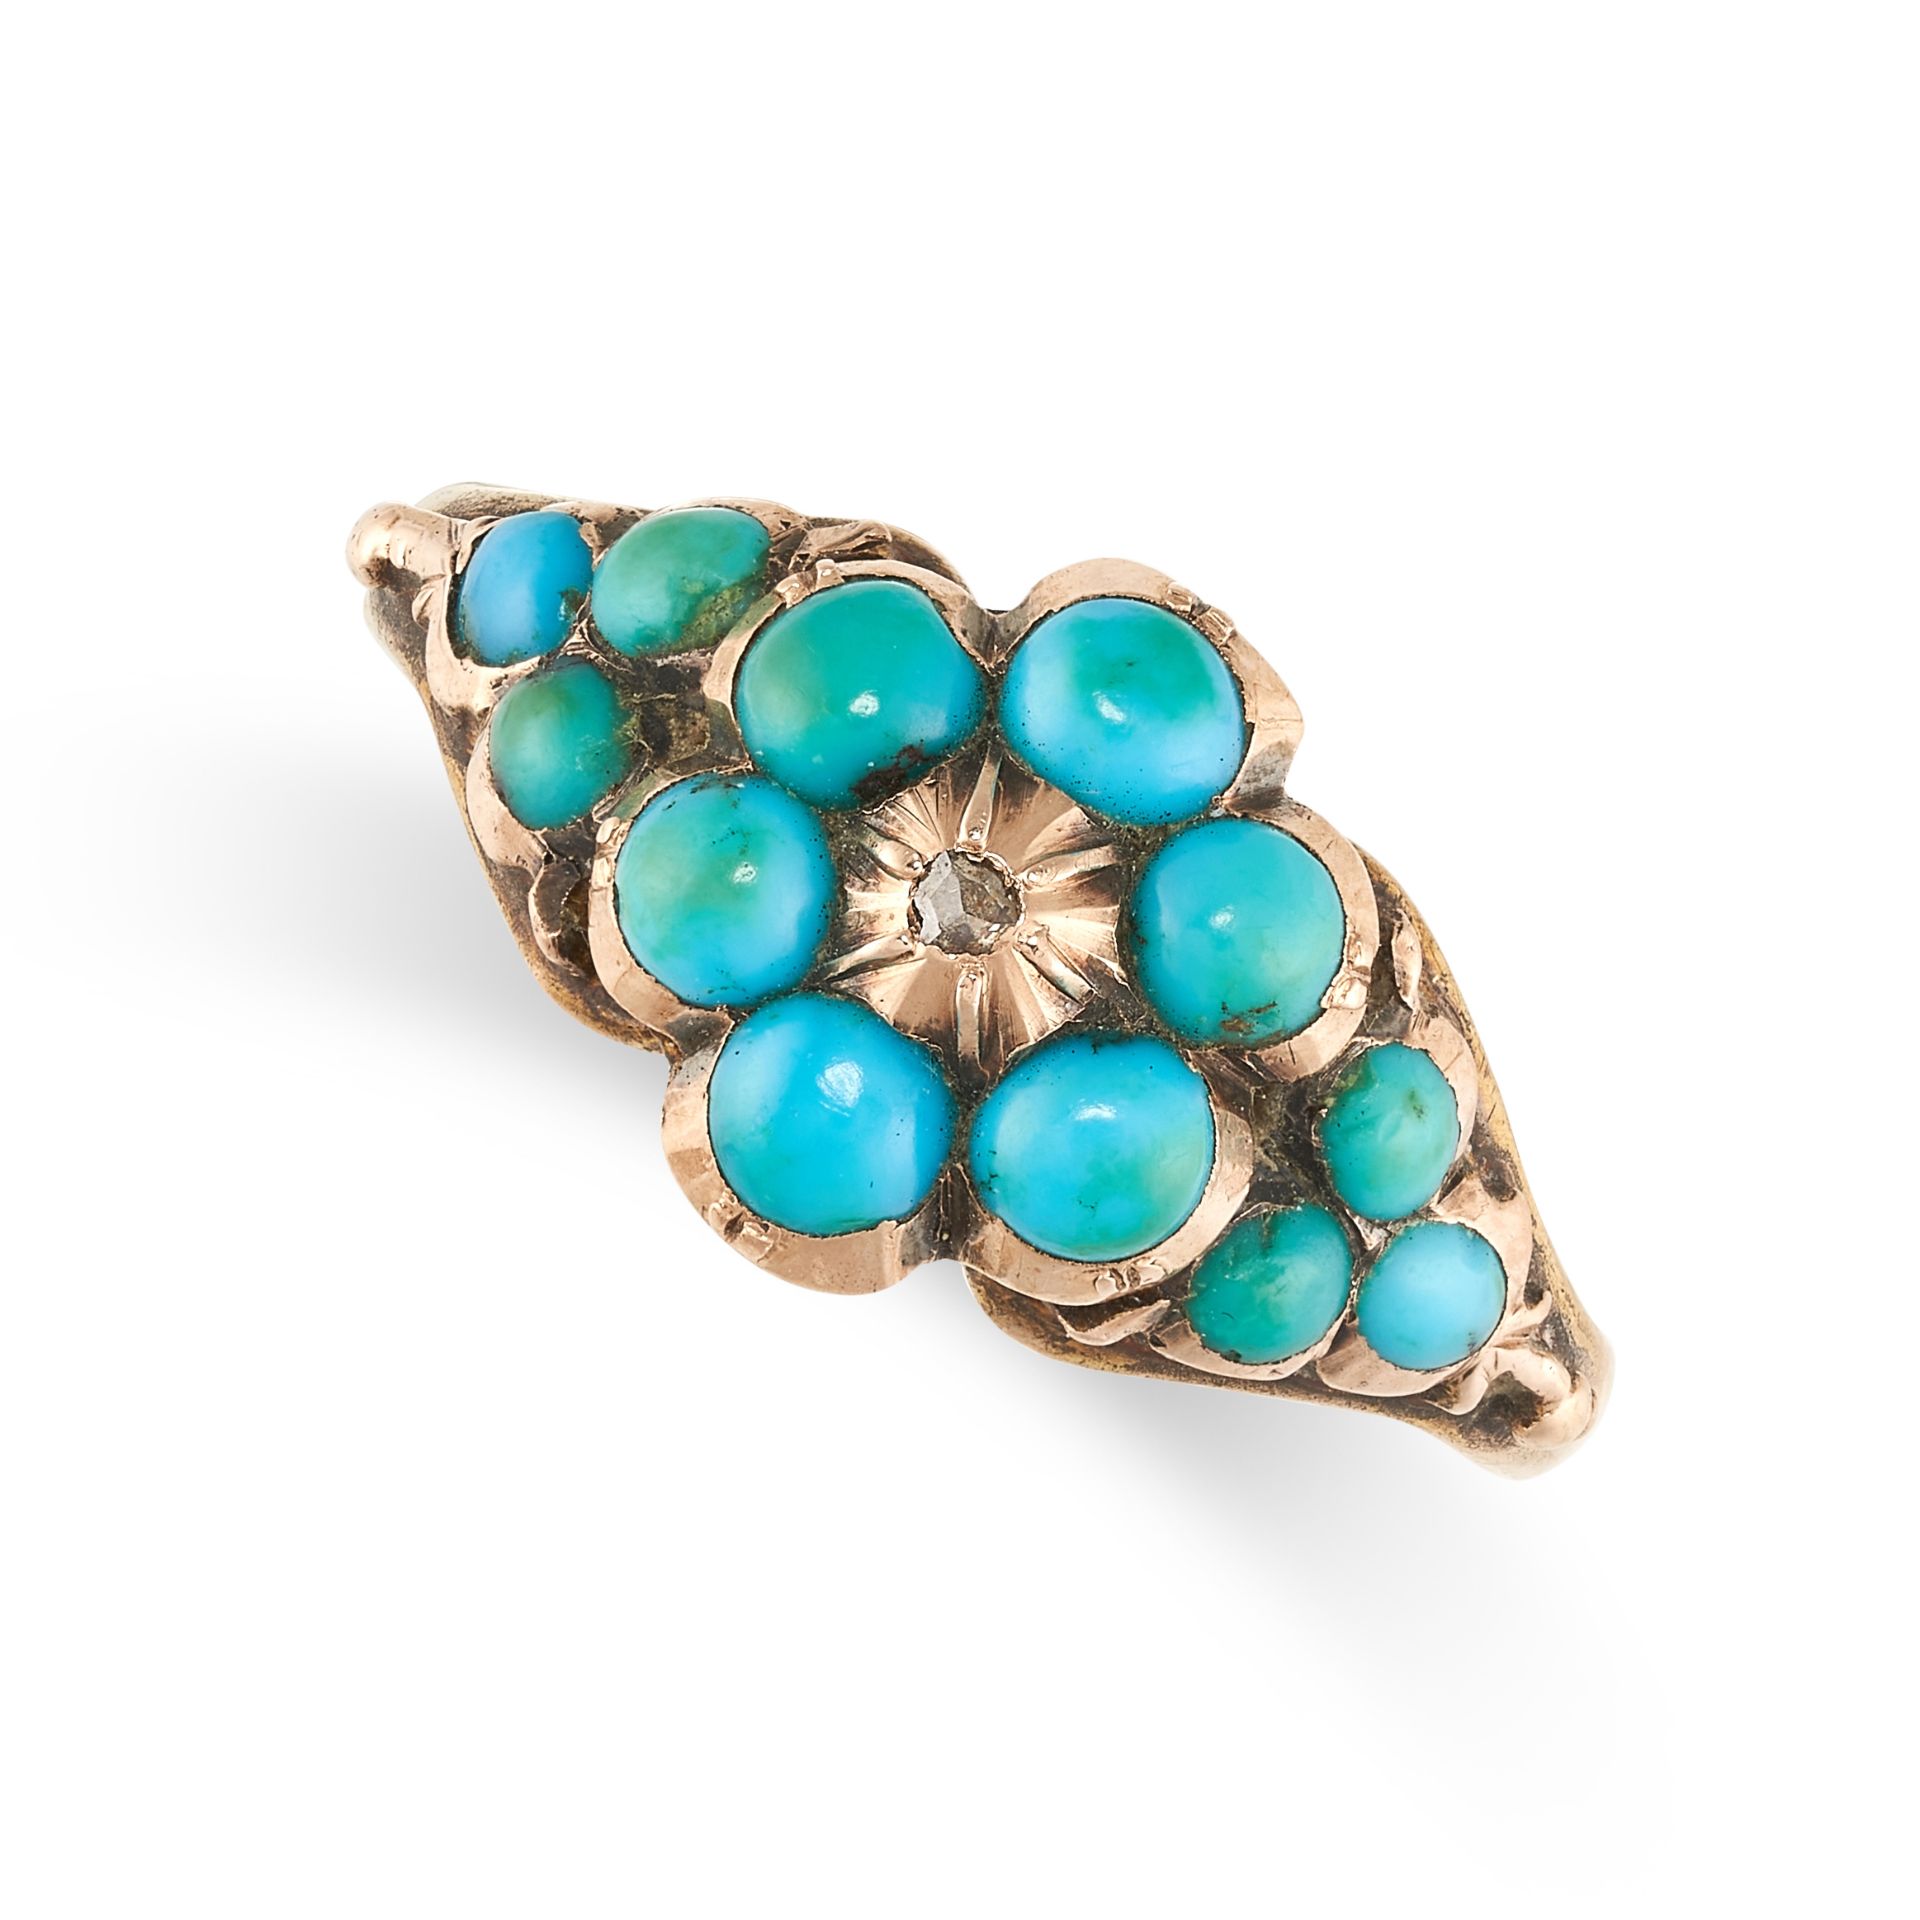 NO RESERVE - AN ANTIQUE VICTORIAN TURQUOISE AND DIAMOND RING, 19TH CENTURY in yellow gold,